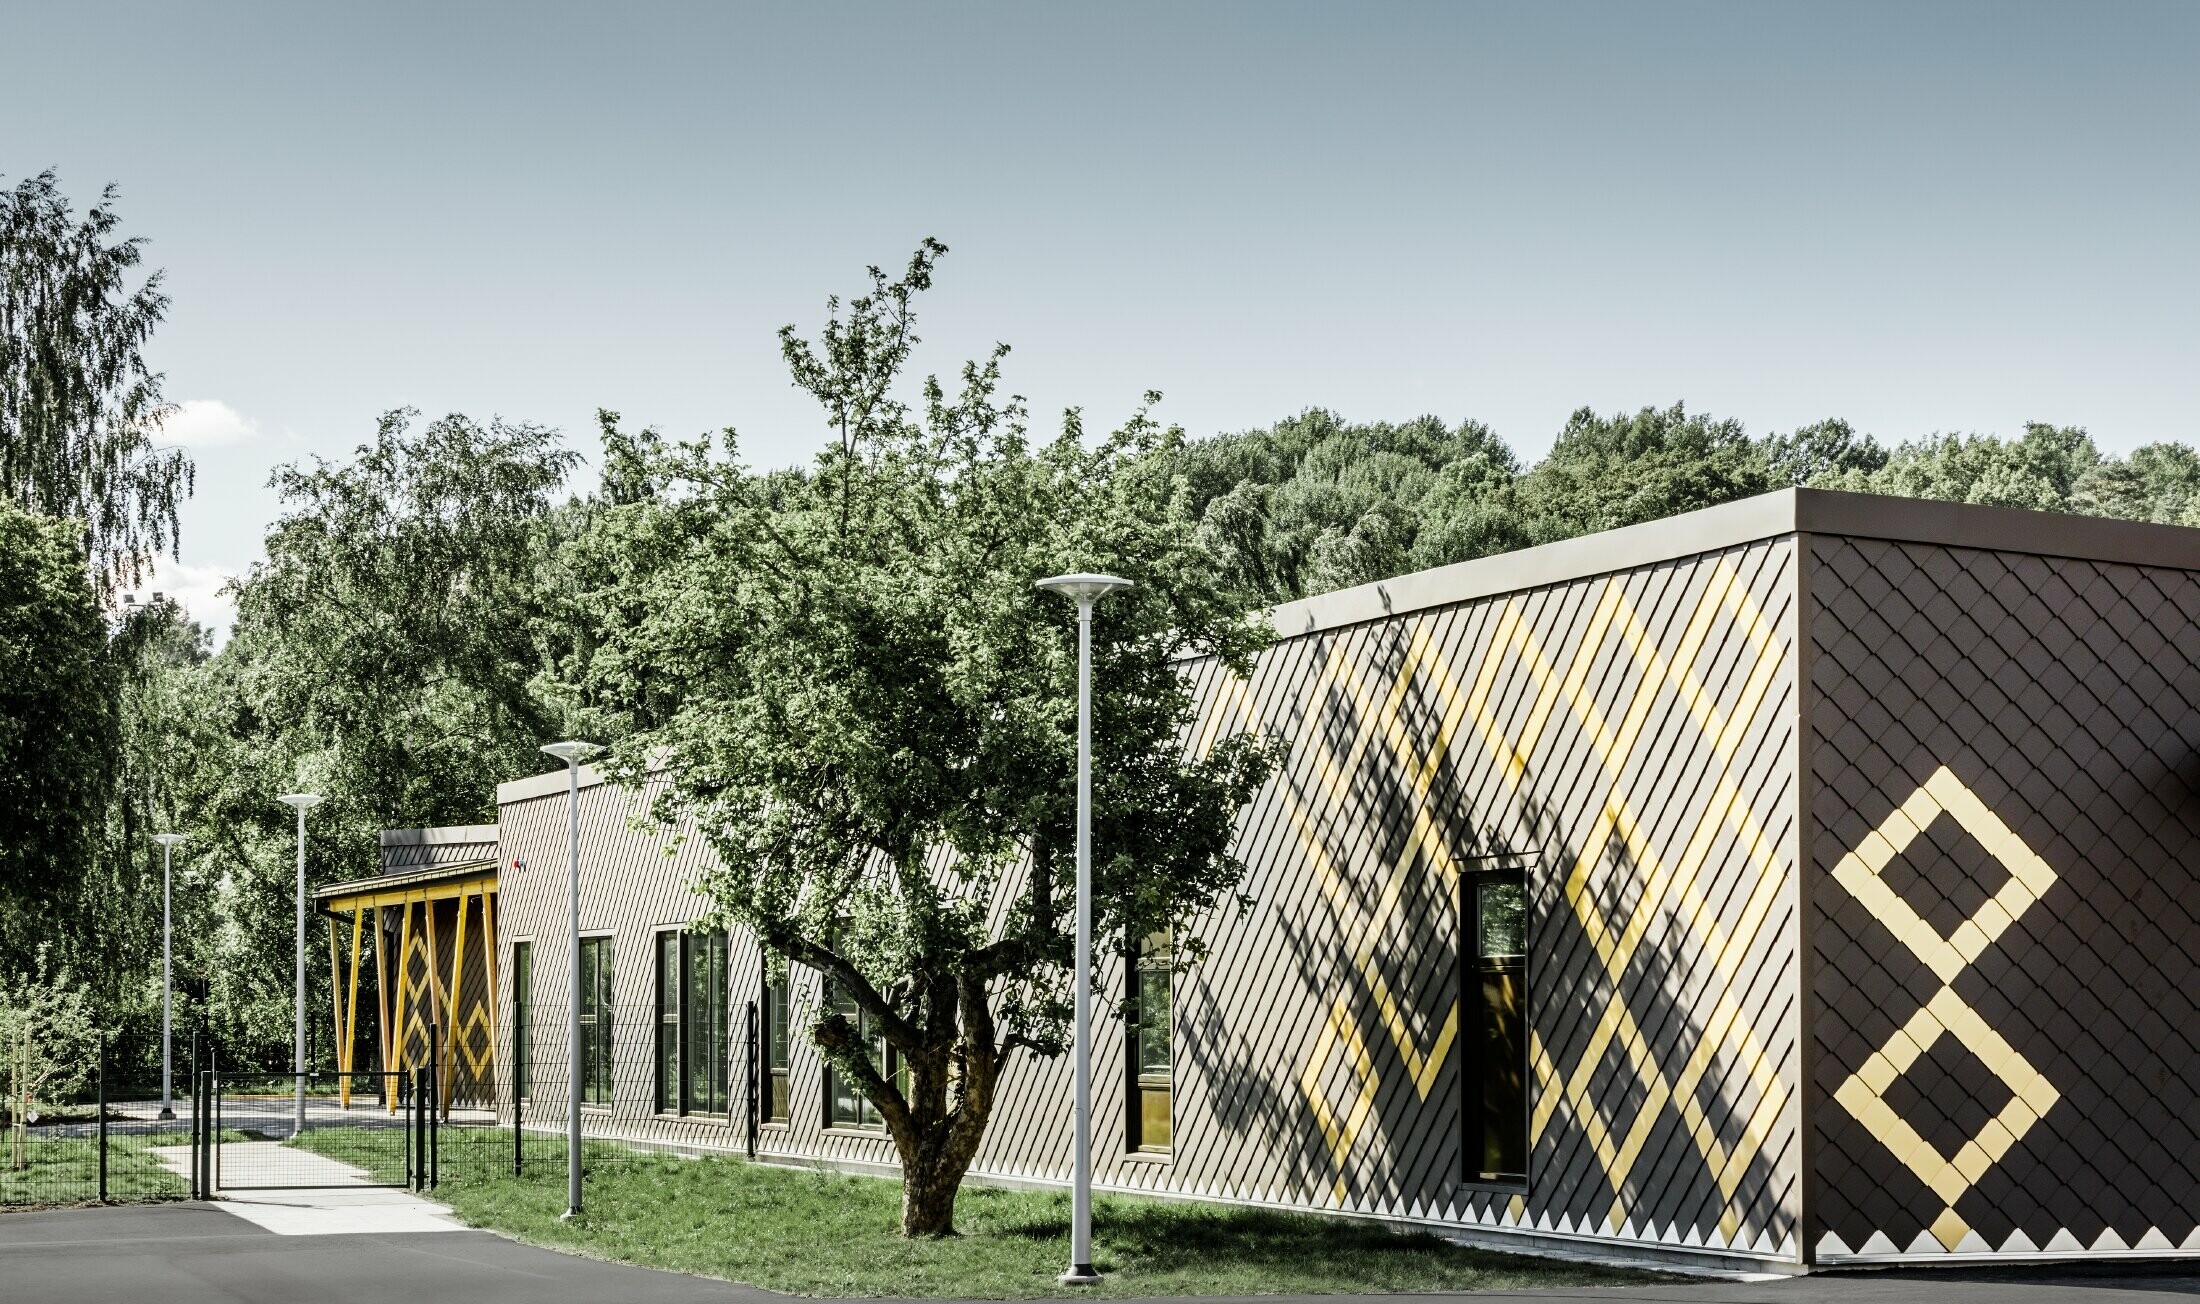 The nursery school in Stockholm was clad in the durable PREFA aluminium façade. The rhomboid tiles in brown and Mayan gold create an interesting pattern.